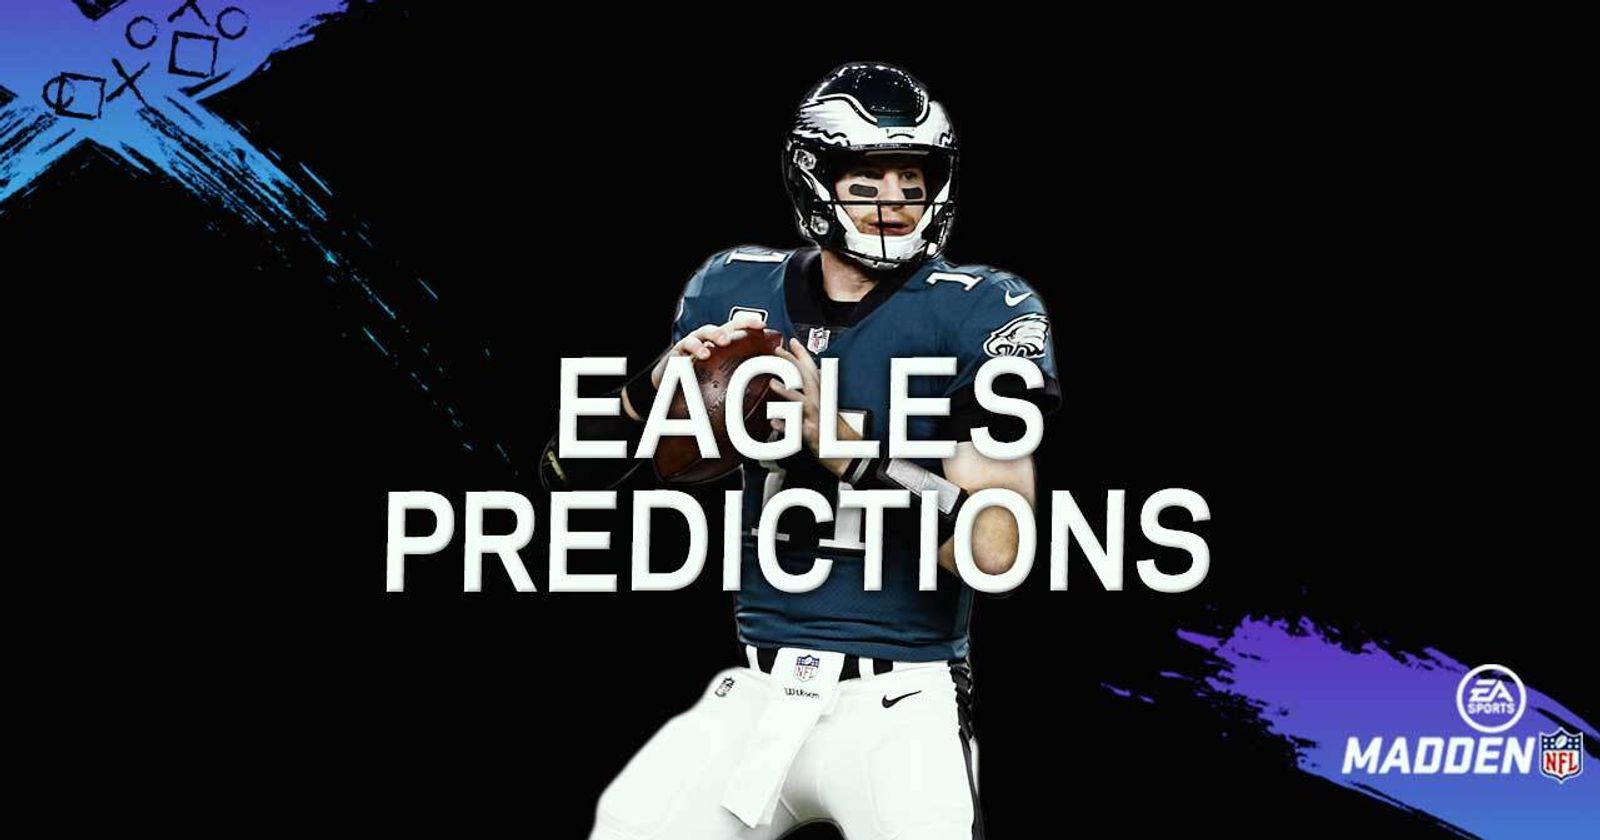 Eagles continue to impress media outlets making predictions about season